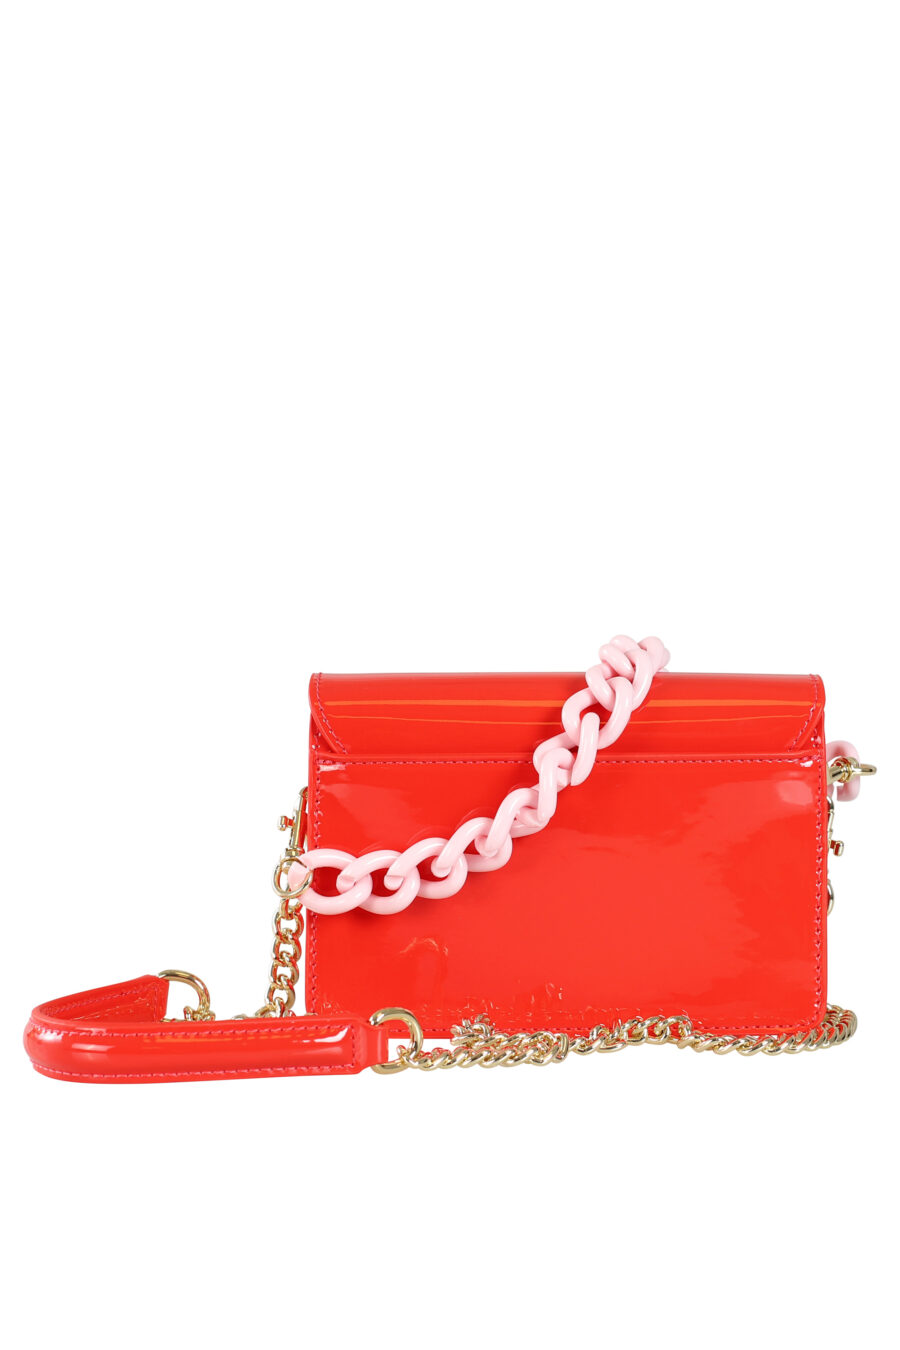 Red shoulder bag with logo and chain - 8052019146684 4